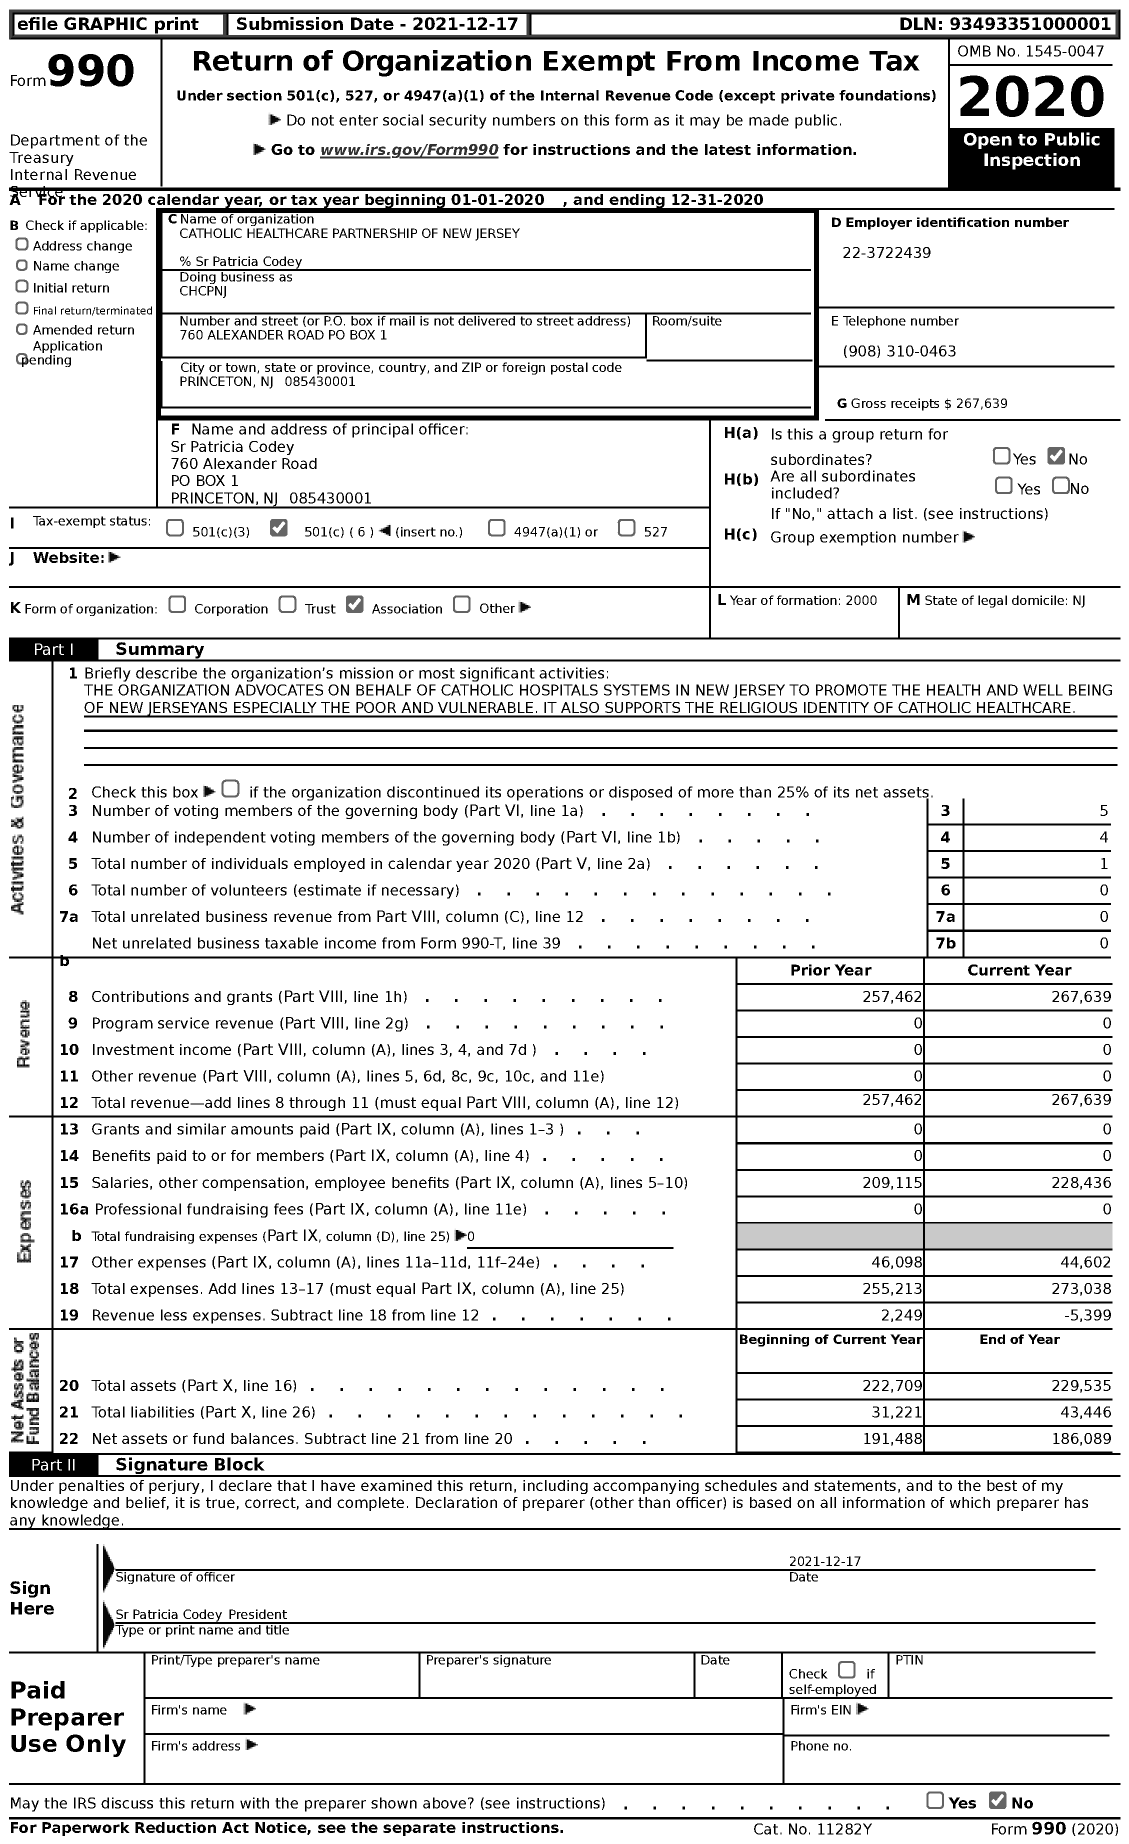 Image of first page of 2020 Form 990 for Catholic Healthcare Partnership of New Jersey (CHCPNJ)